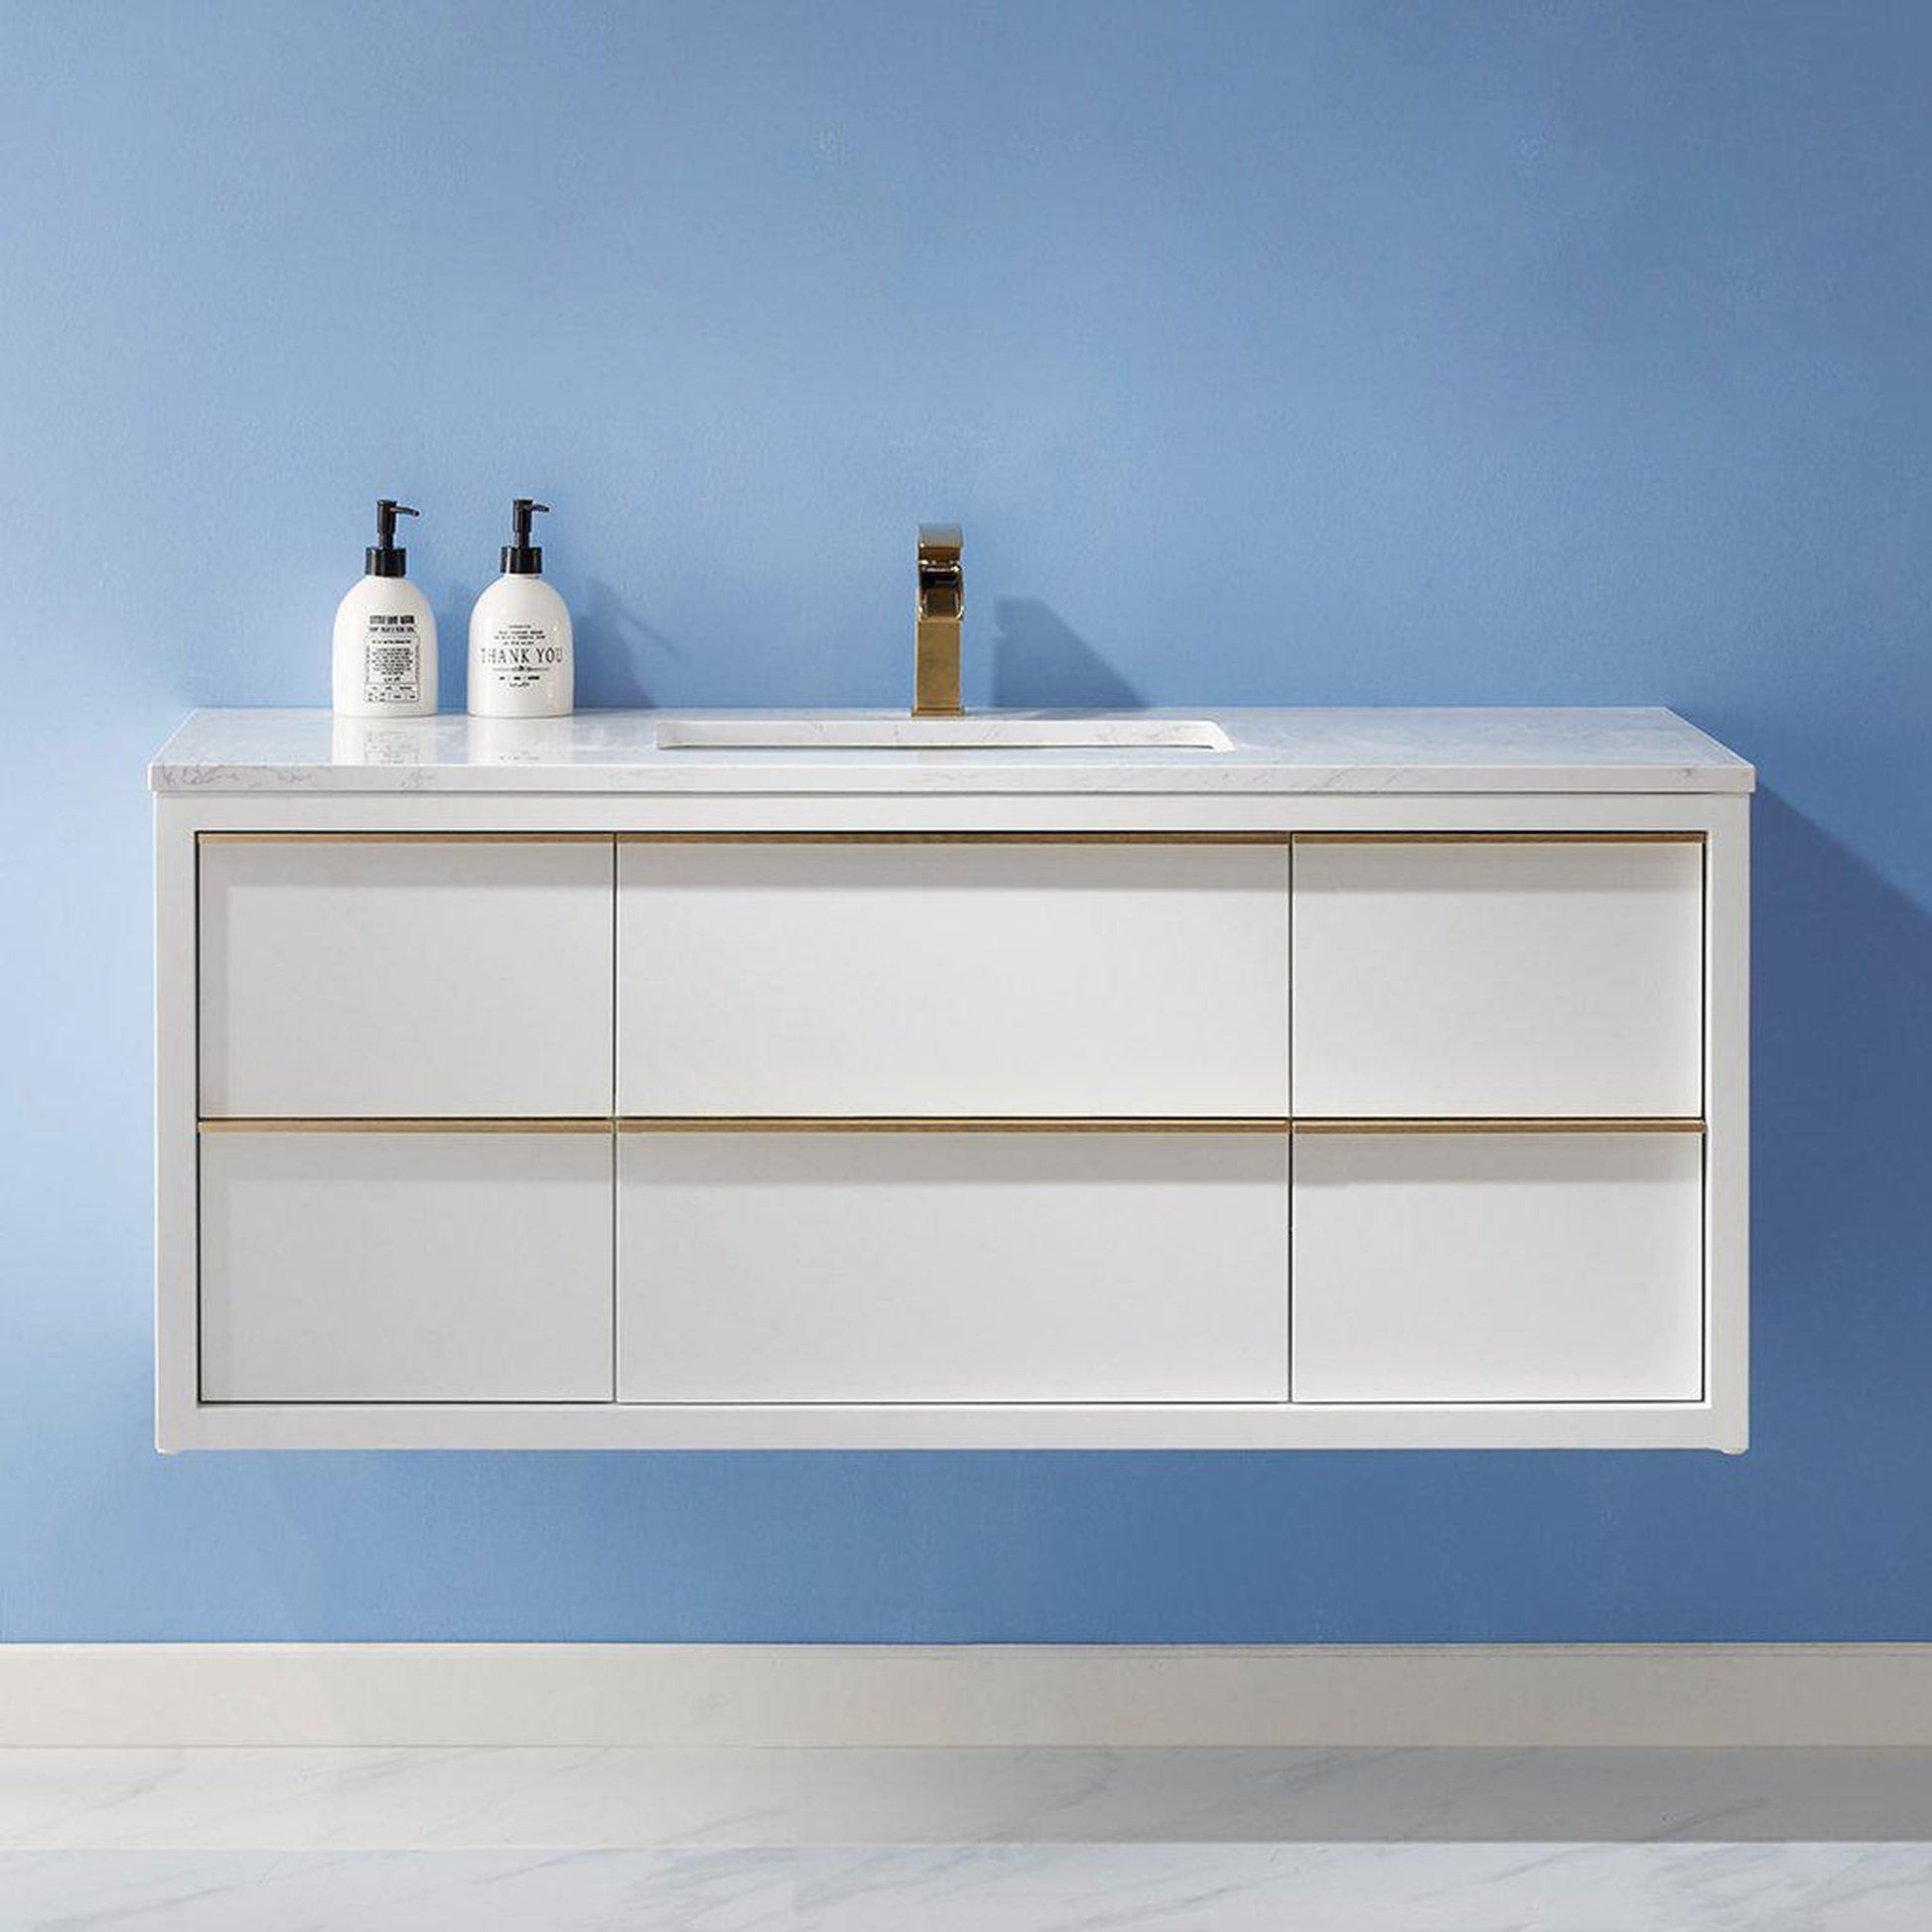 Altair Morgan 48" Single White Wall-Mounted Bathroom Vanity Set With Aosta White Composite Stone Top, Rectangular Undermount Ceramic Sink, and Overflow